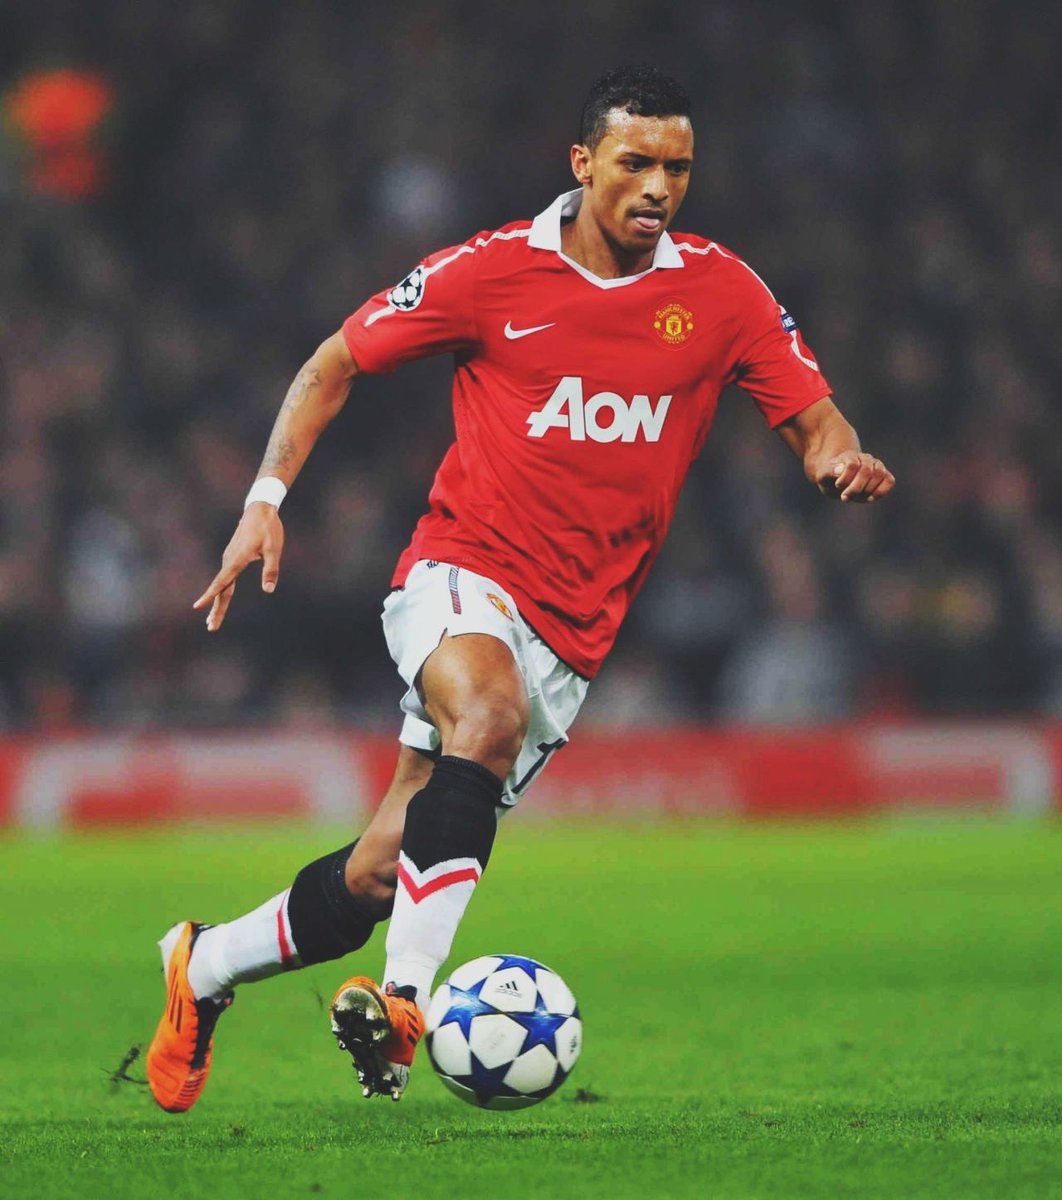 8. Luis Nani - 2010/1110 goals & 20 assists. Won Manchester United’s POTY award. Got in the PFA Team of the Year.Won us so many League games on his own when the others were struggling. Our most consistent attacking player that season. Premier League winner and UCL finalist.